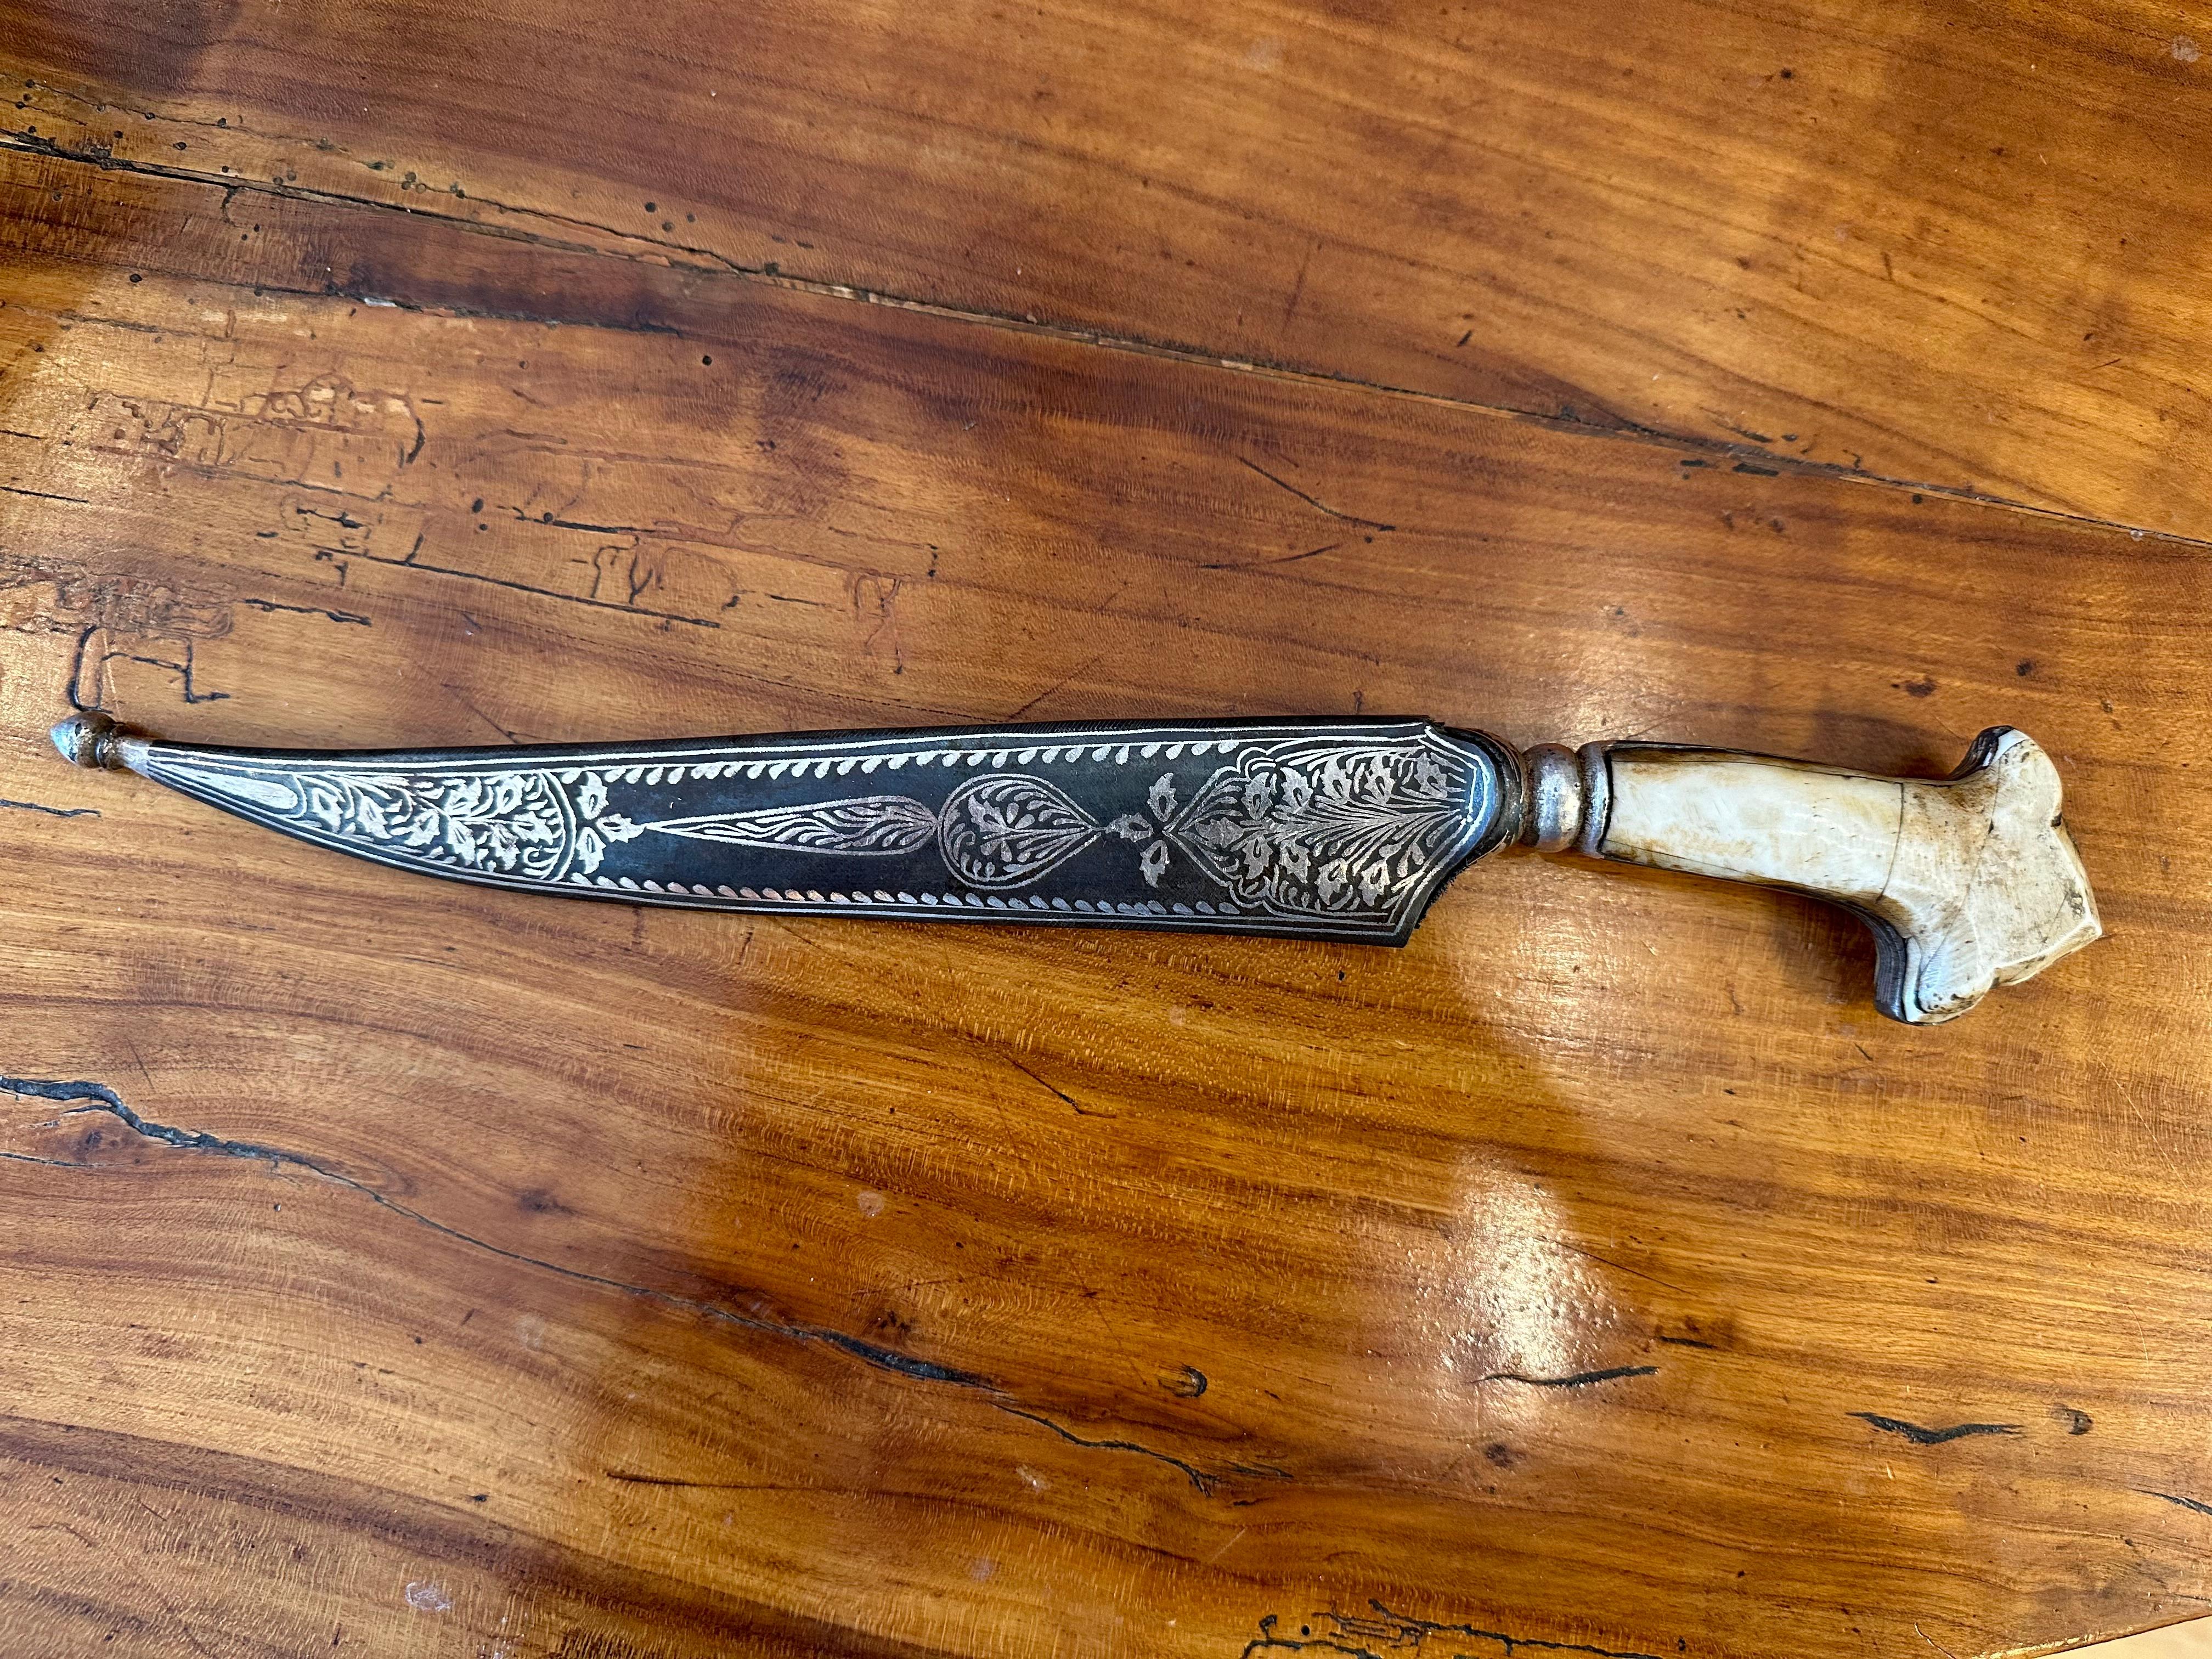 Silver “Jambiya” or Curved Dagger With Its Sheath. These are often Extremely well Crafted with Extraordinary inlaid Silver Designs accentuated with “Neillo”. They Often have Ivory Handles and were worn to Emphasize a Man’s Status. Ottoman Empire